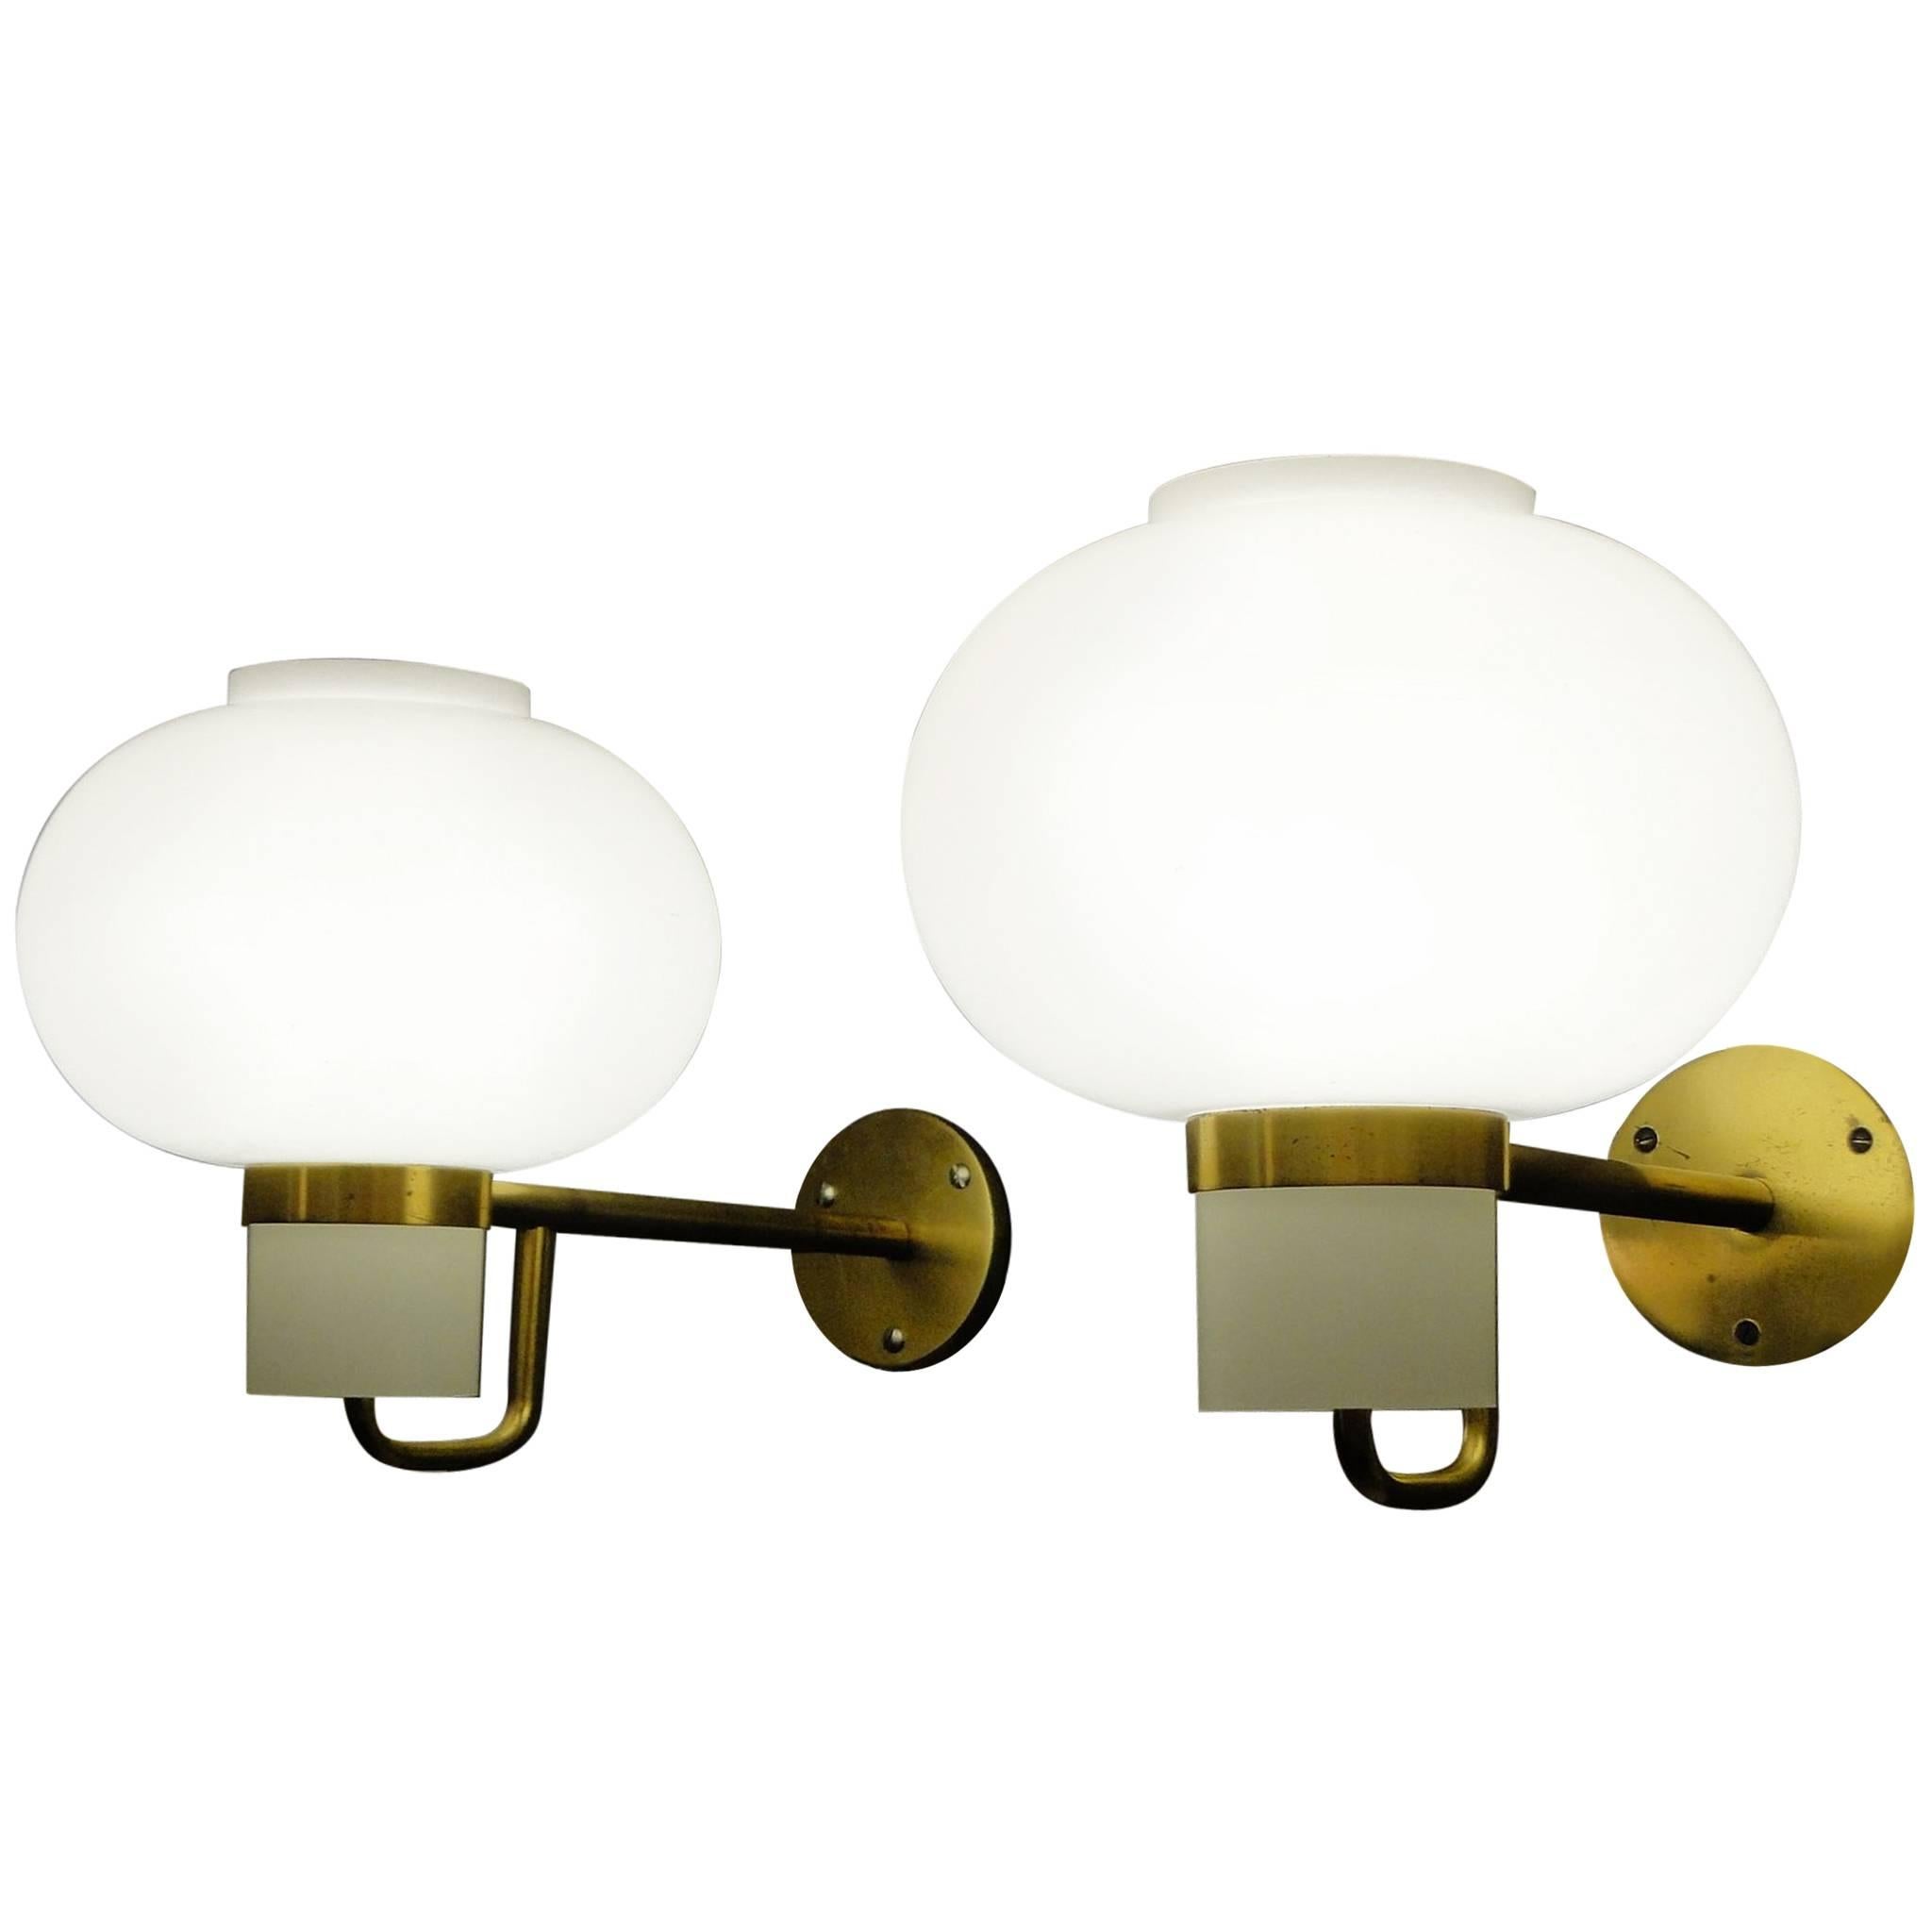 Danish Modernist Cased Glass and Brass Wall Light by Bent Karlby for Lyfa, 1950s For Sale